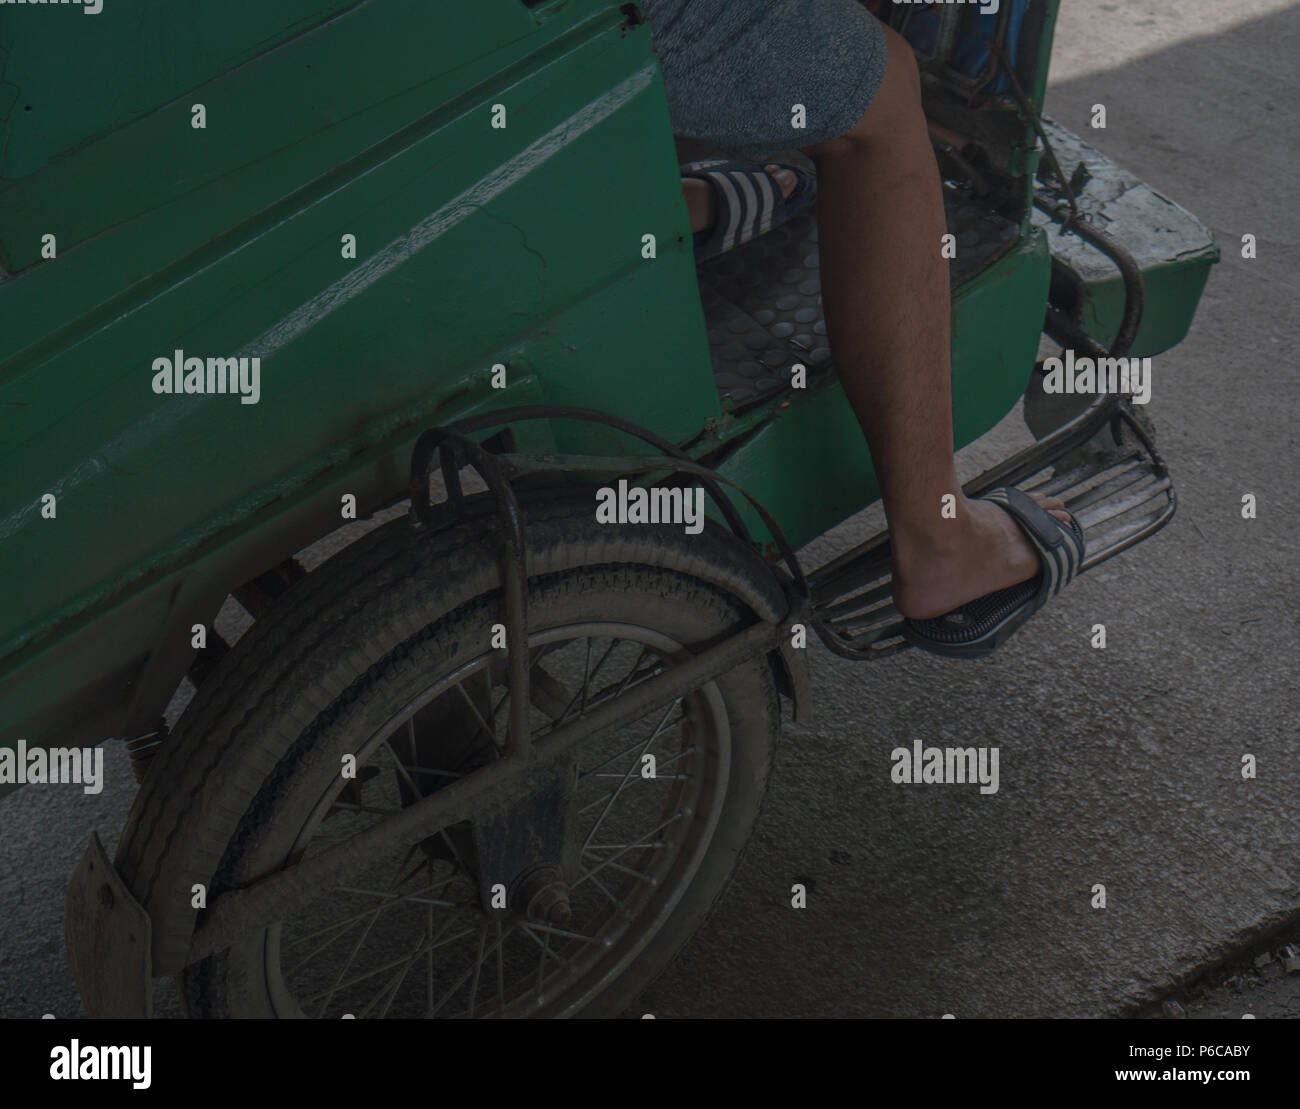 Riding the public tricycle in the Philippines. Stock Photo